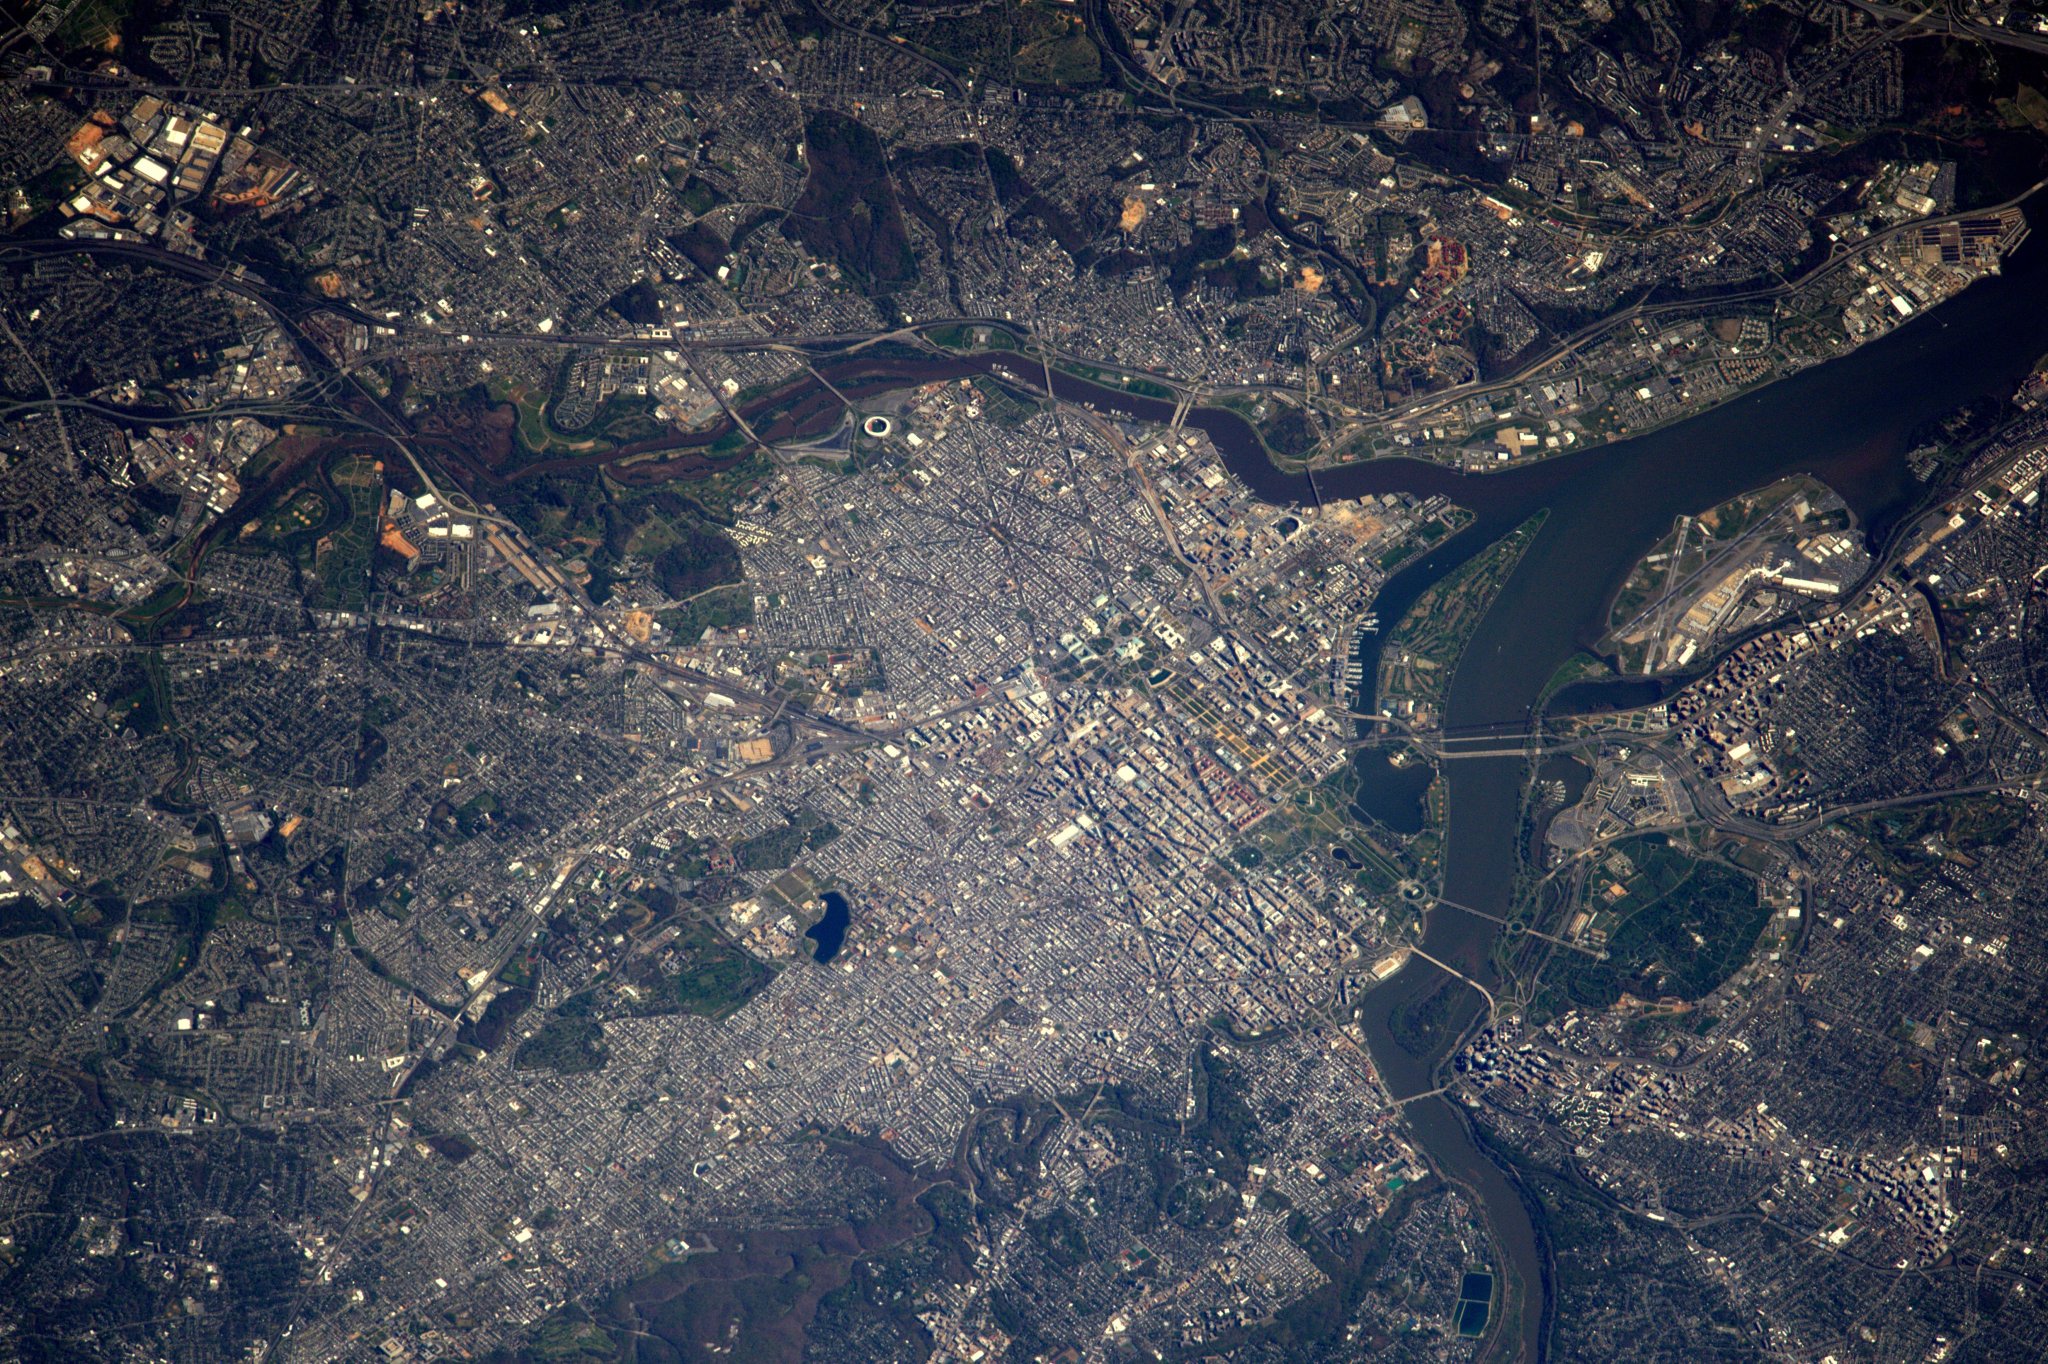 Washington DC photographed from low Earth orbit